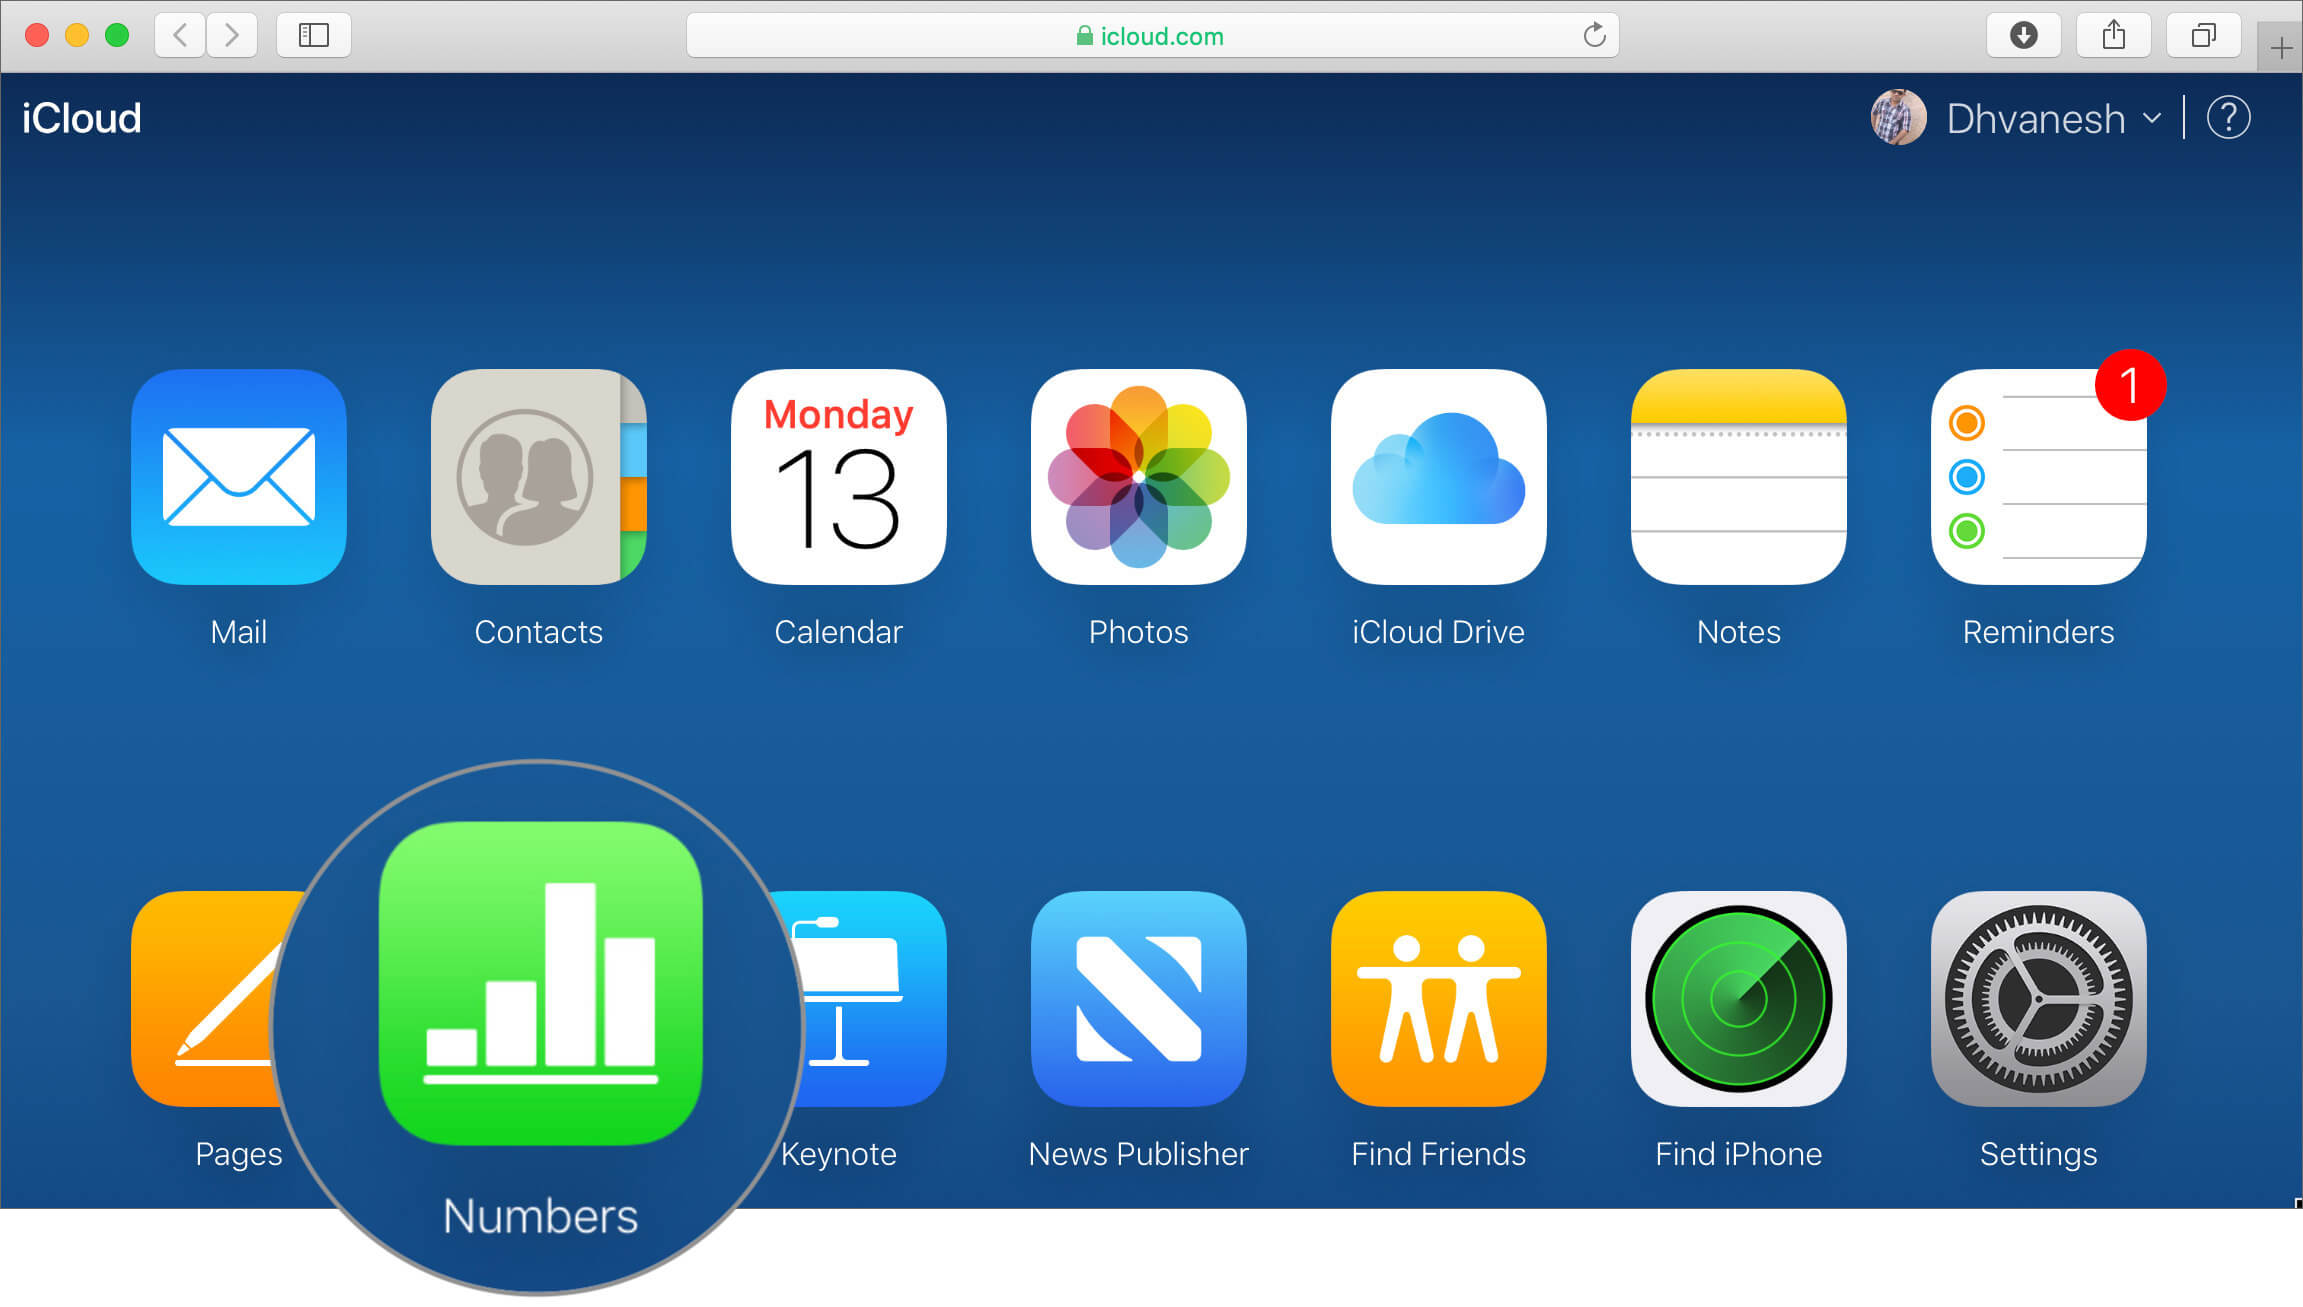 Click on Numbers that particular iWork app in iCloud